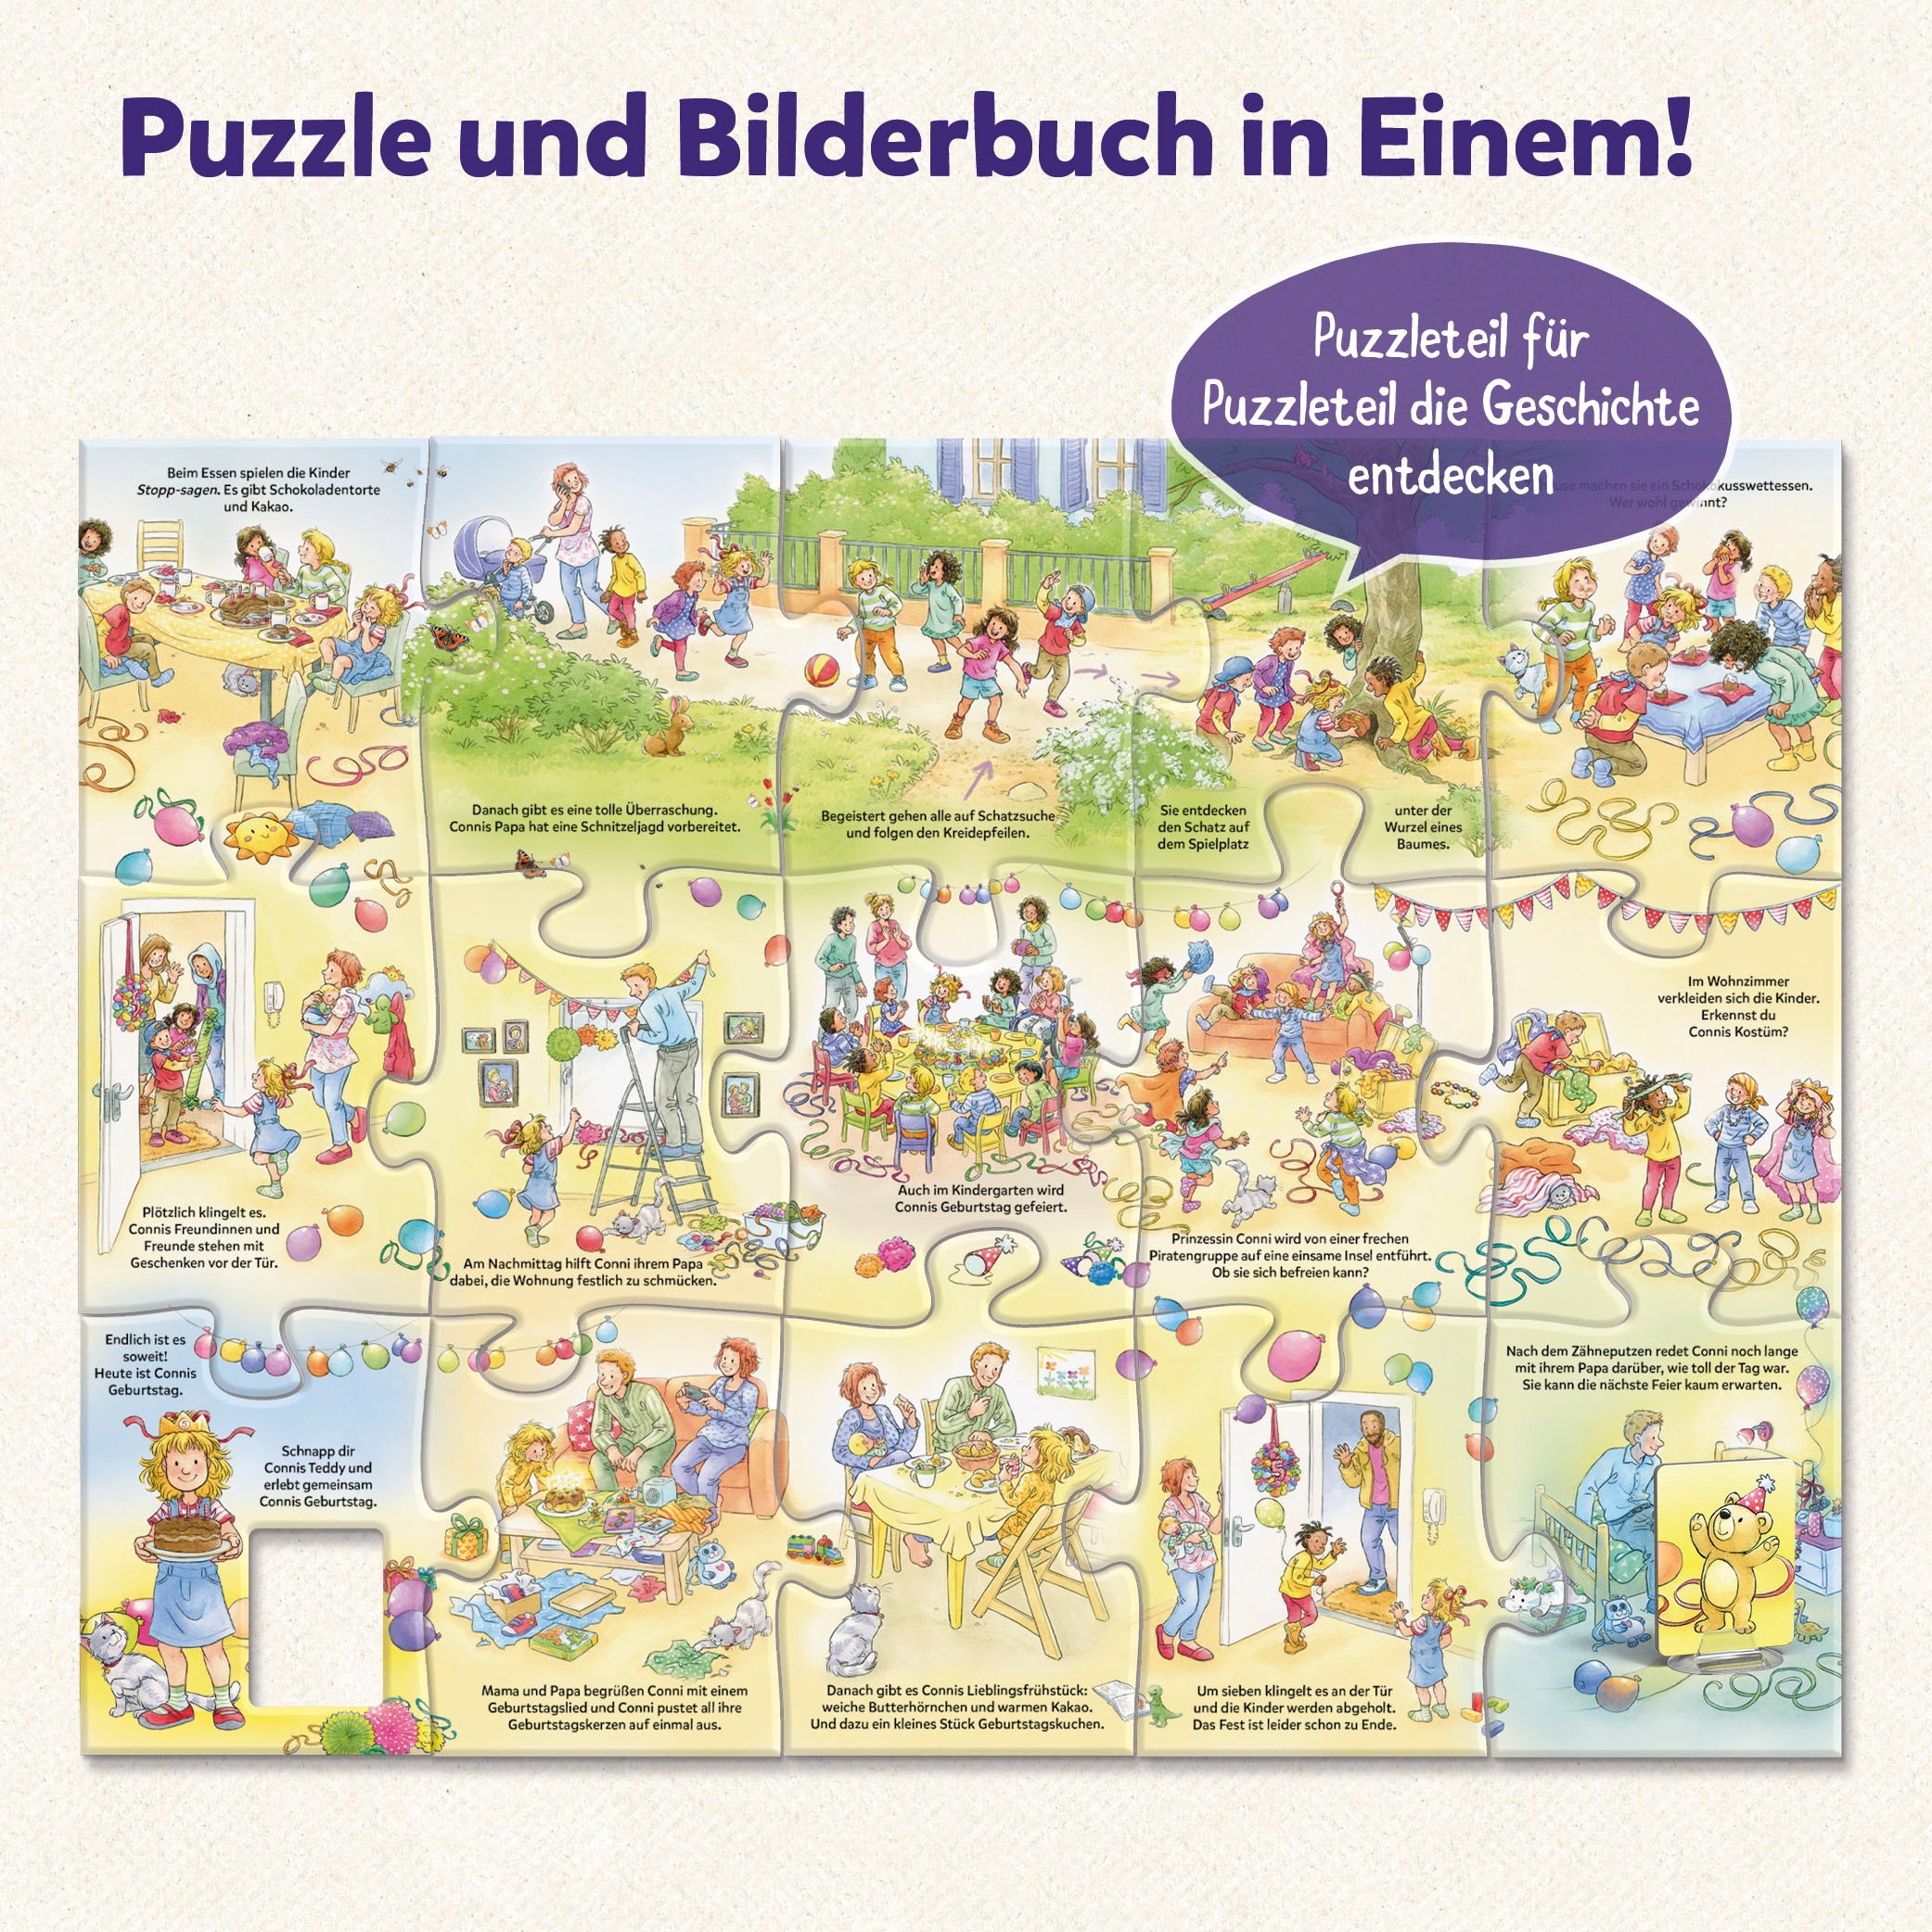 Kosmos Puzzle »Mein erstes Story-Puzzle - Conni hat Geburtstag«, Made in Germany